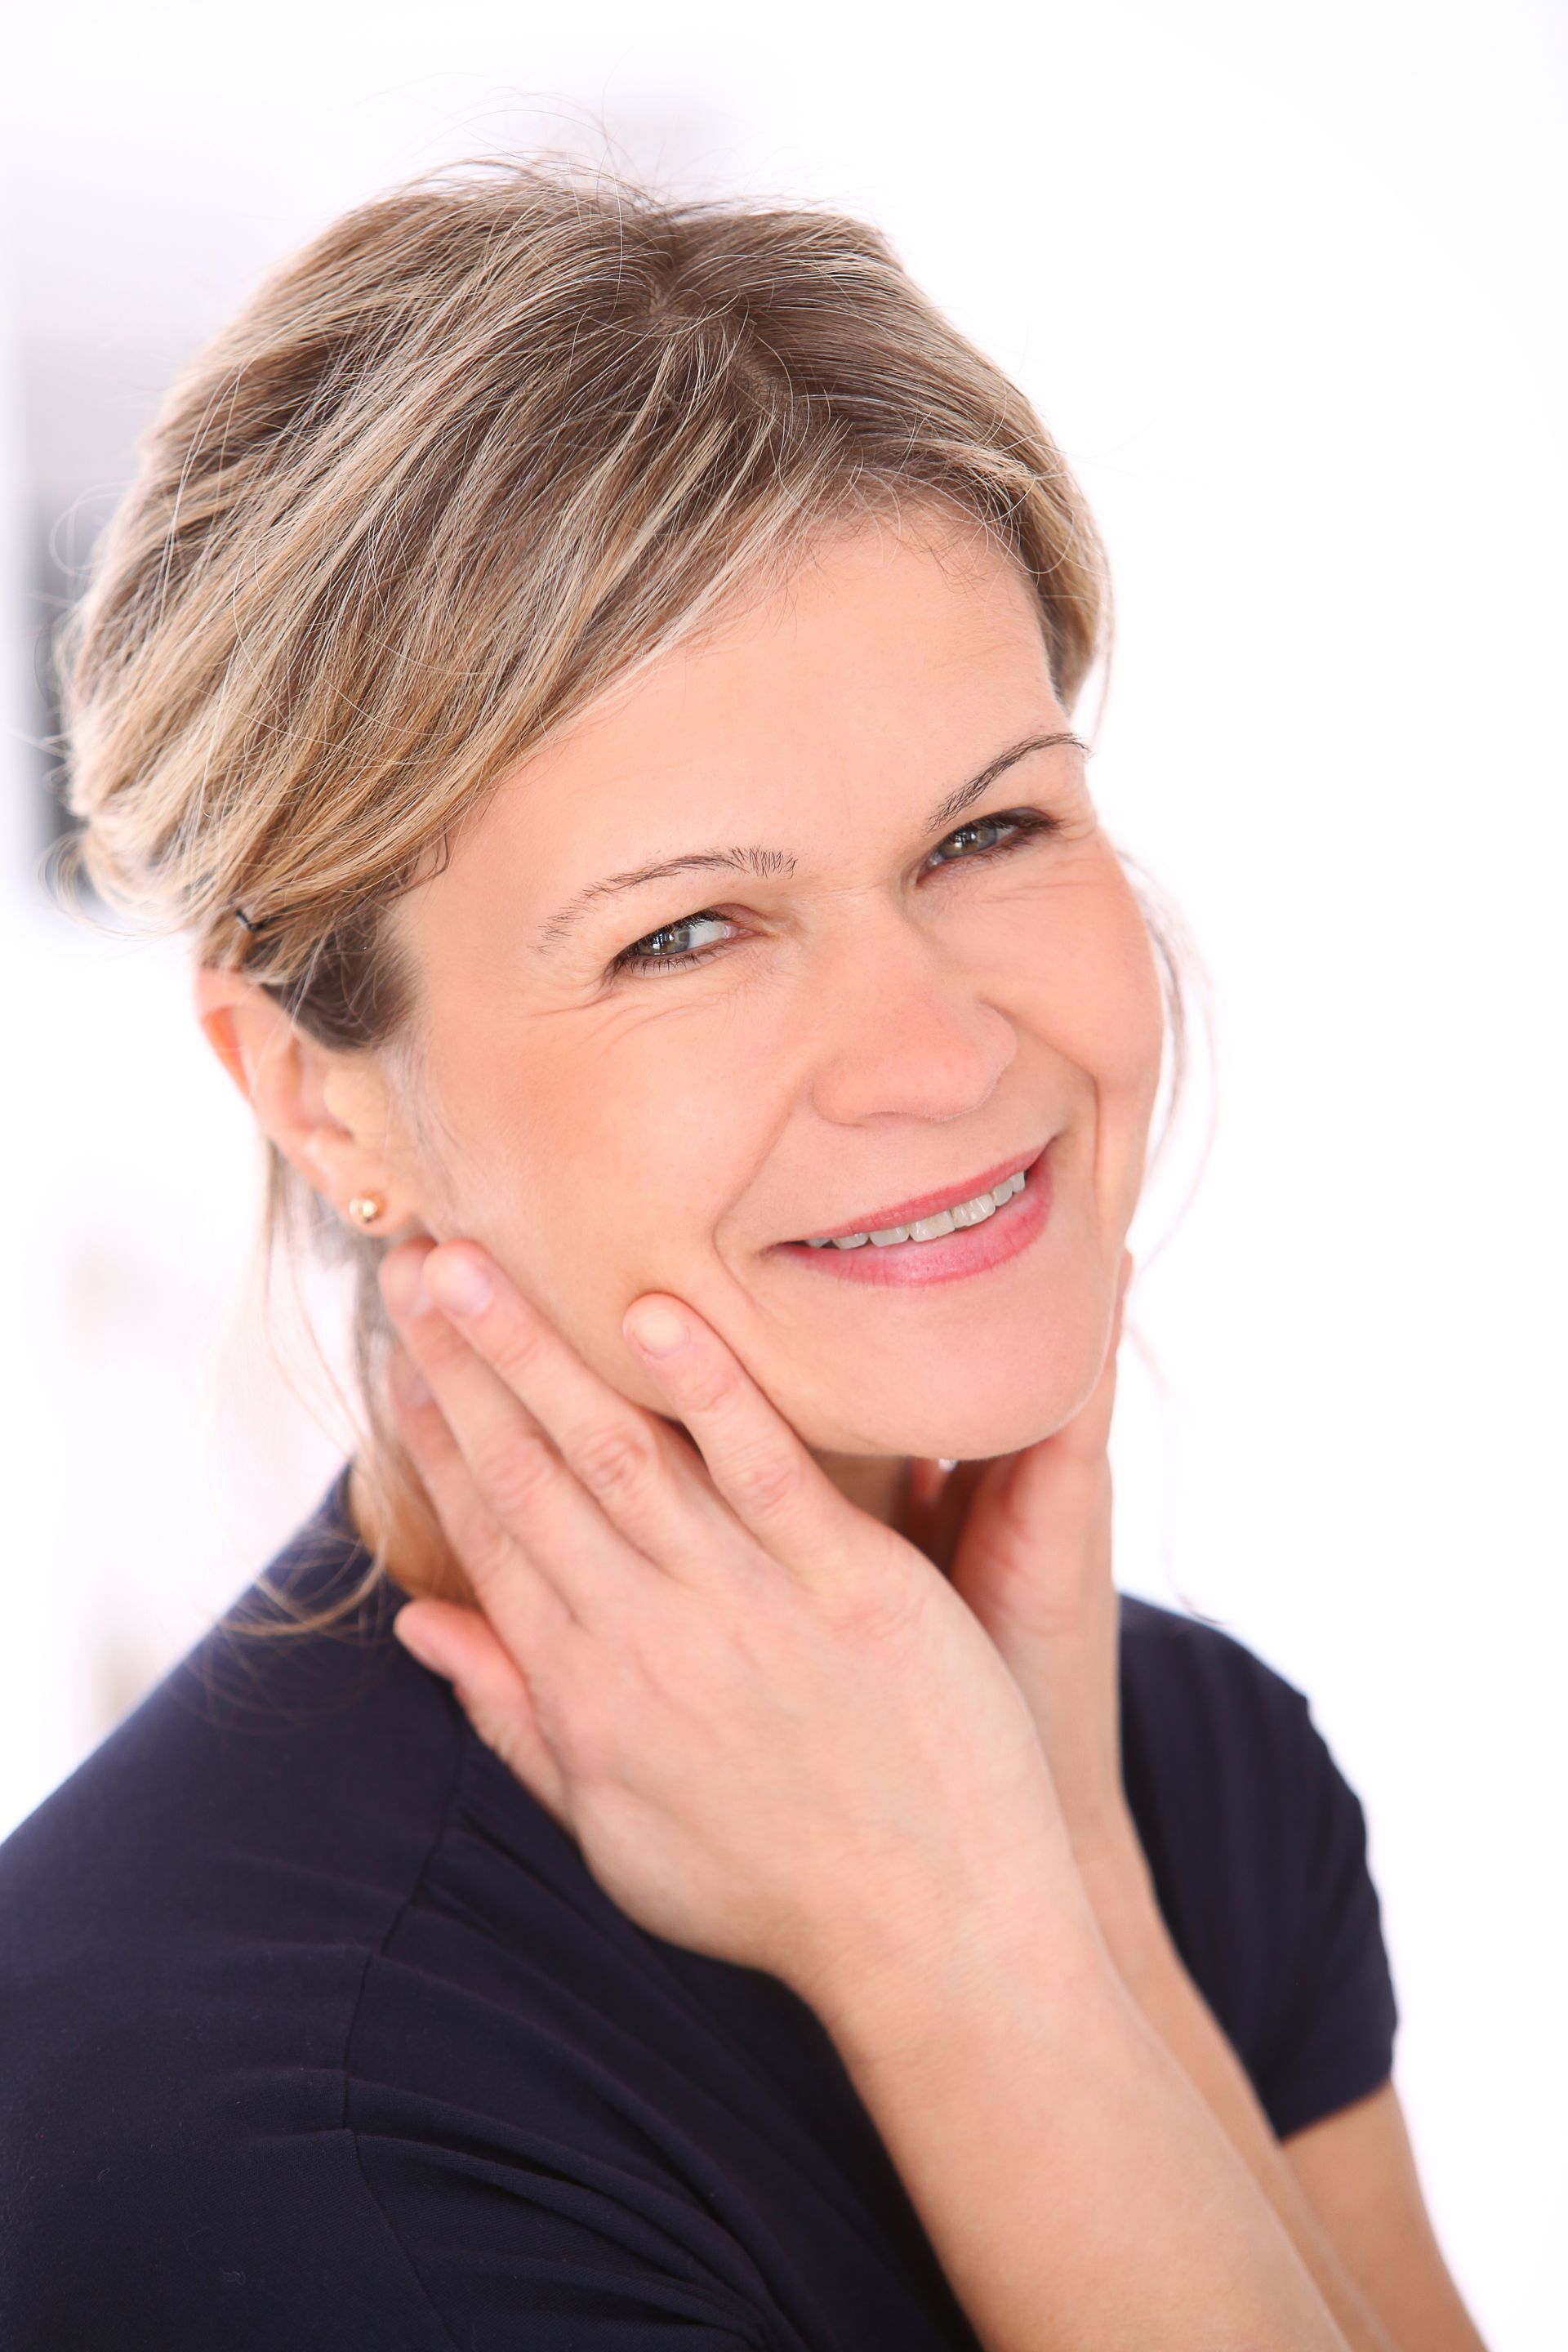 a woman is smiling and touching her face with her hand